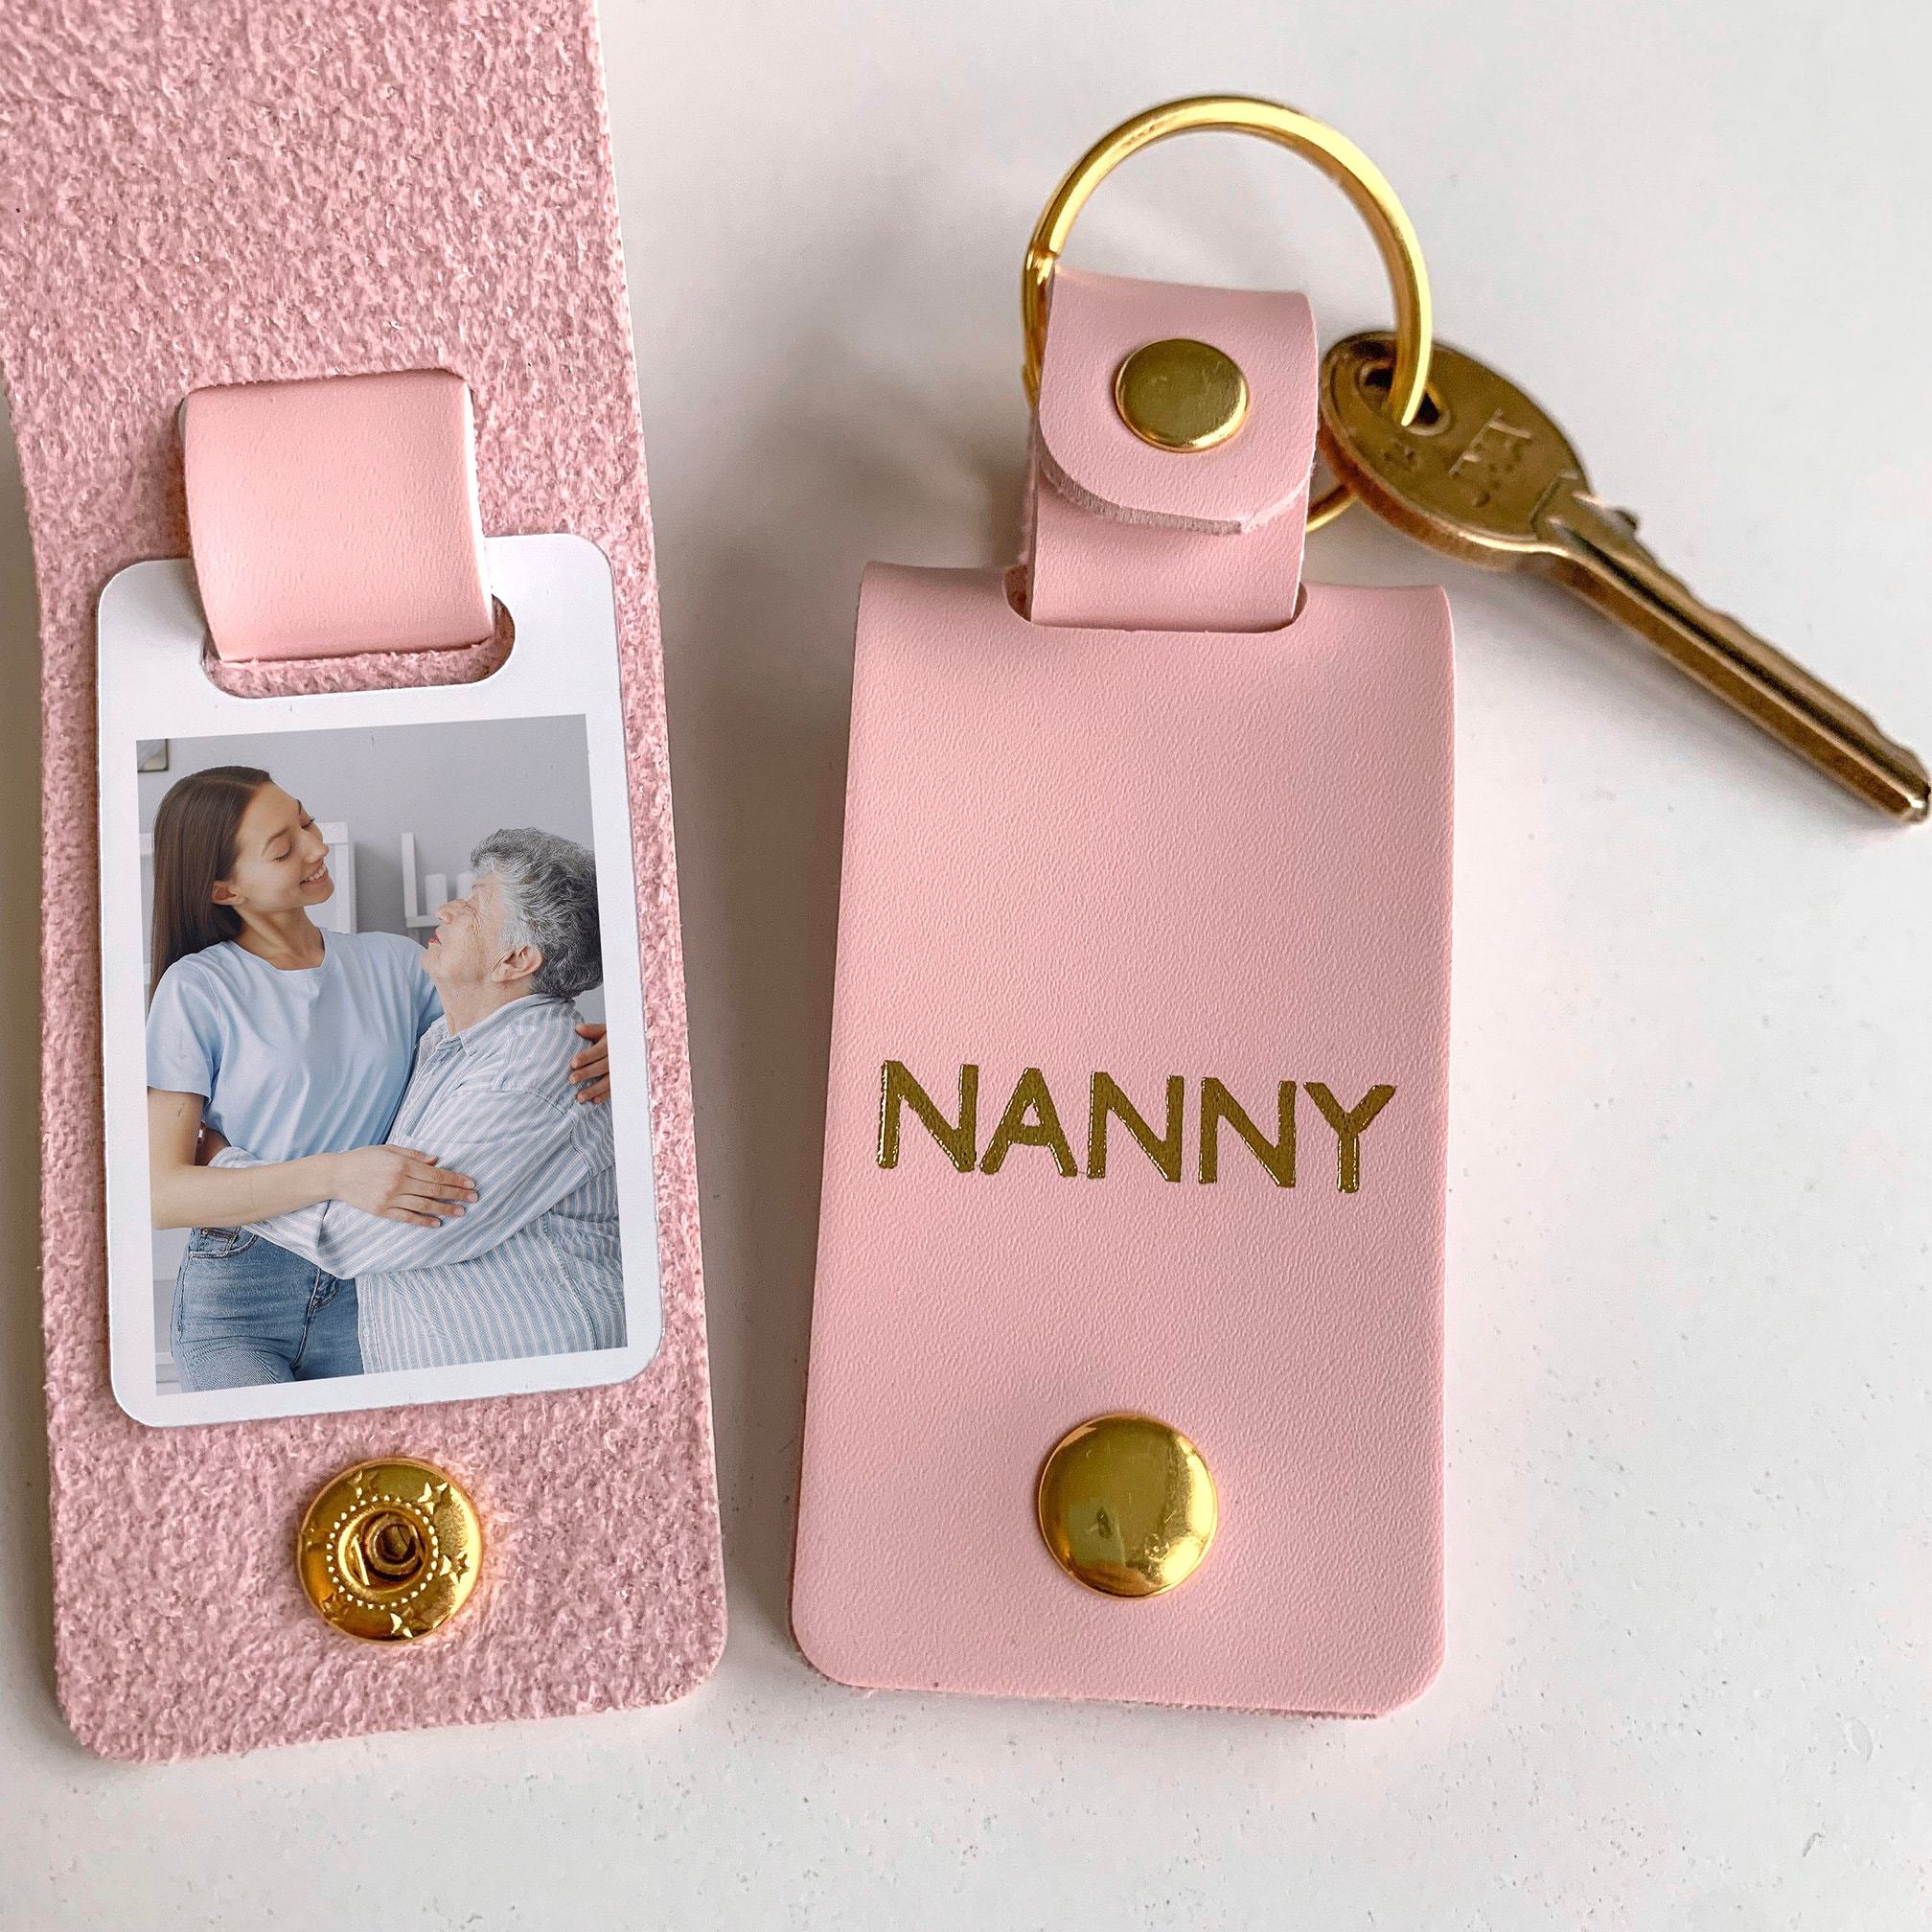 Personalised Nanny Photo Keyring, Leather Photo Keychain, Mother's Day gift for her